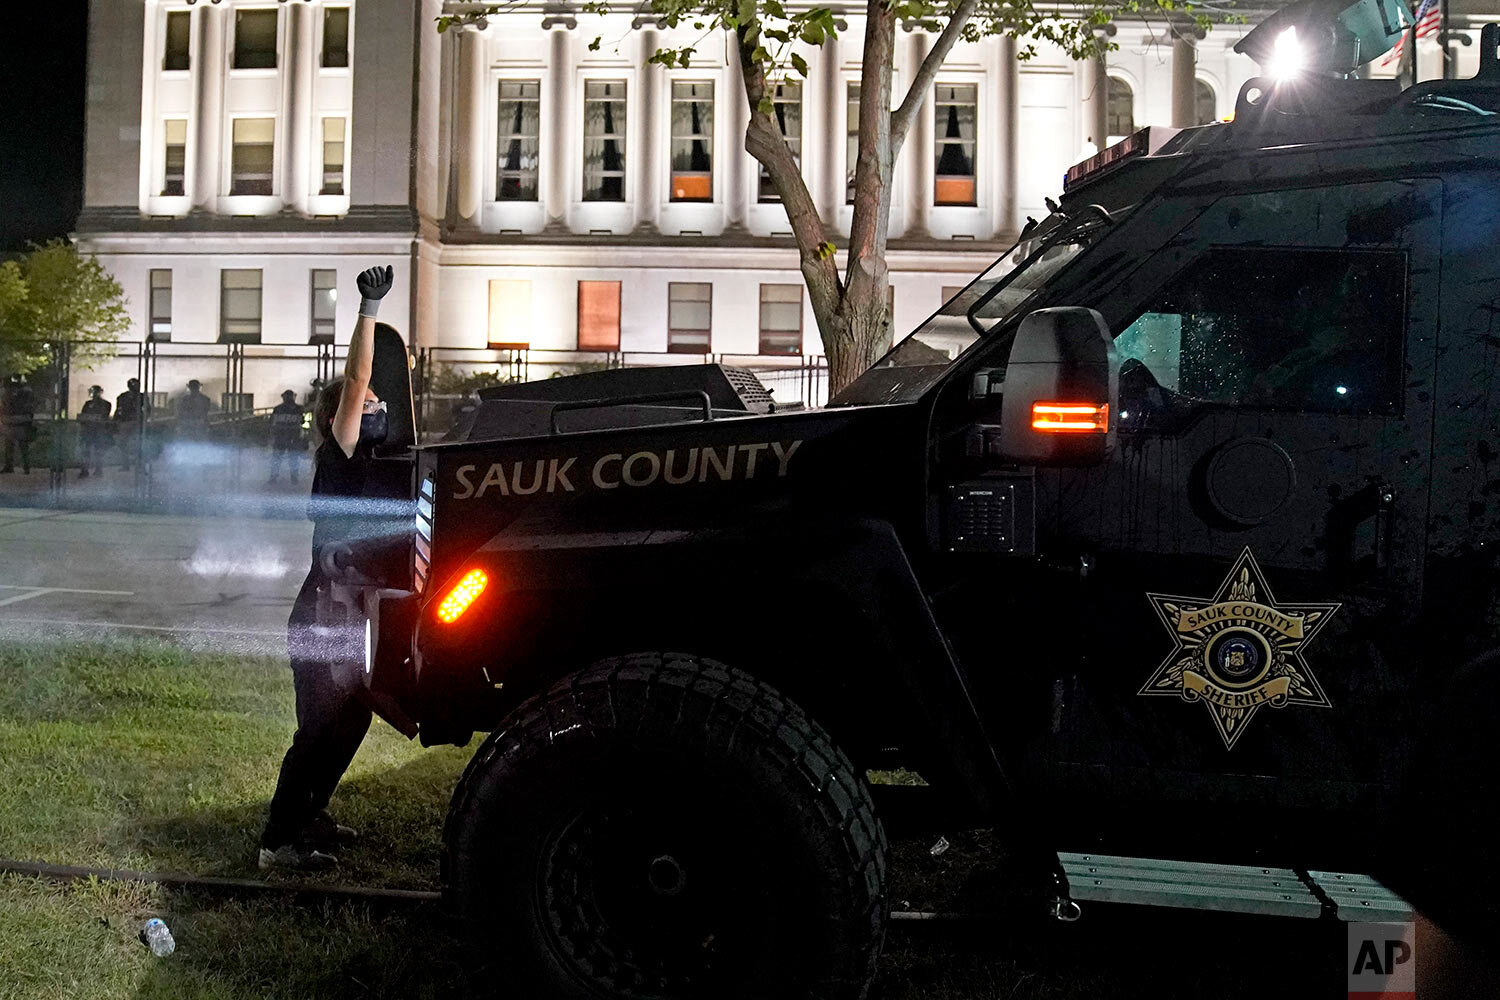  A protester obstructs an armored vehicle attempting to clear the park of demonstrators during clashes outside the Kenosha County Courthouse late Tuesday, Aug. 25, 2020, in Kenosha, Wis.  (AP Photo/David Goldman) 